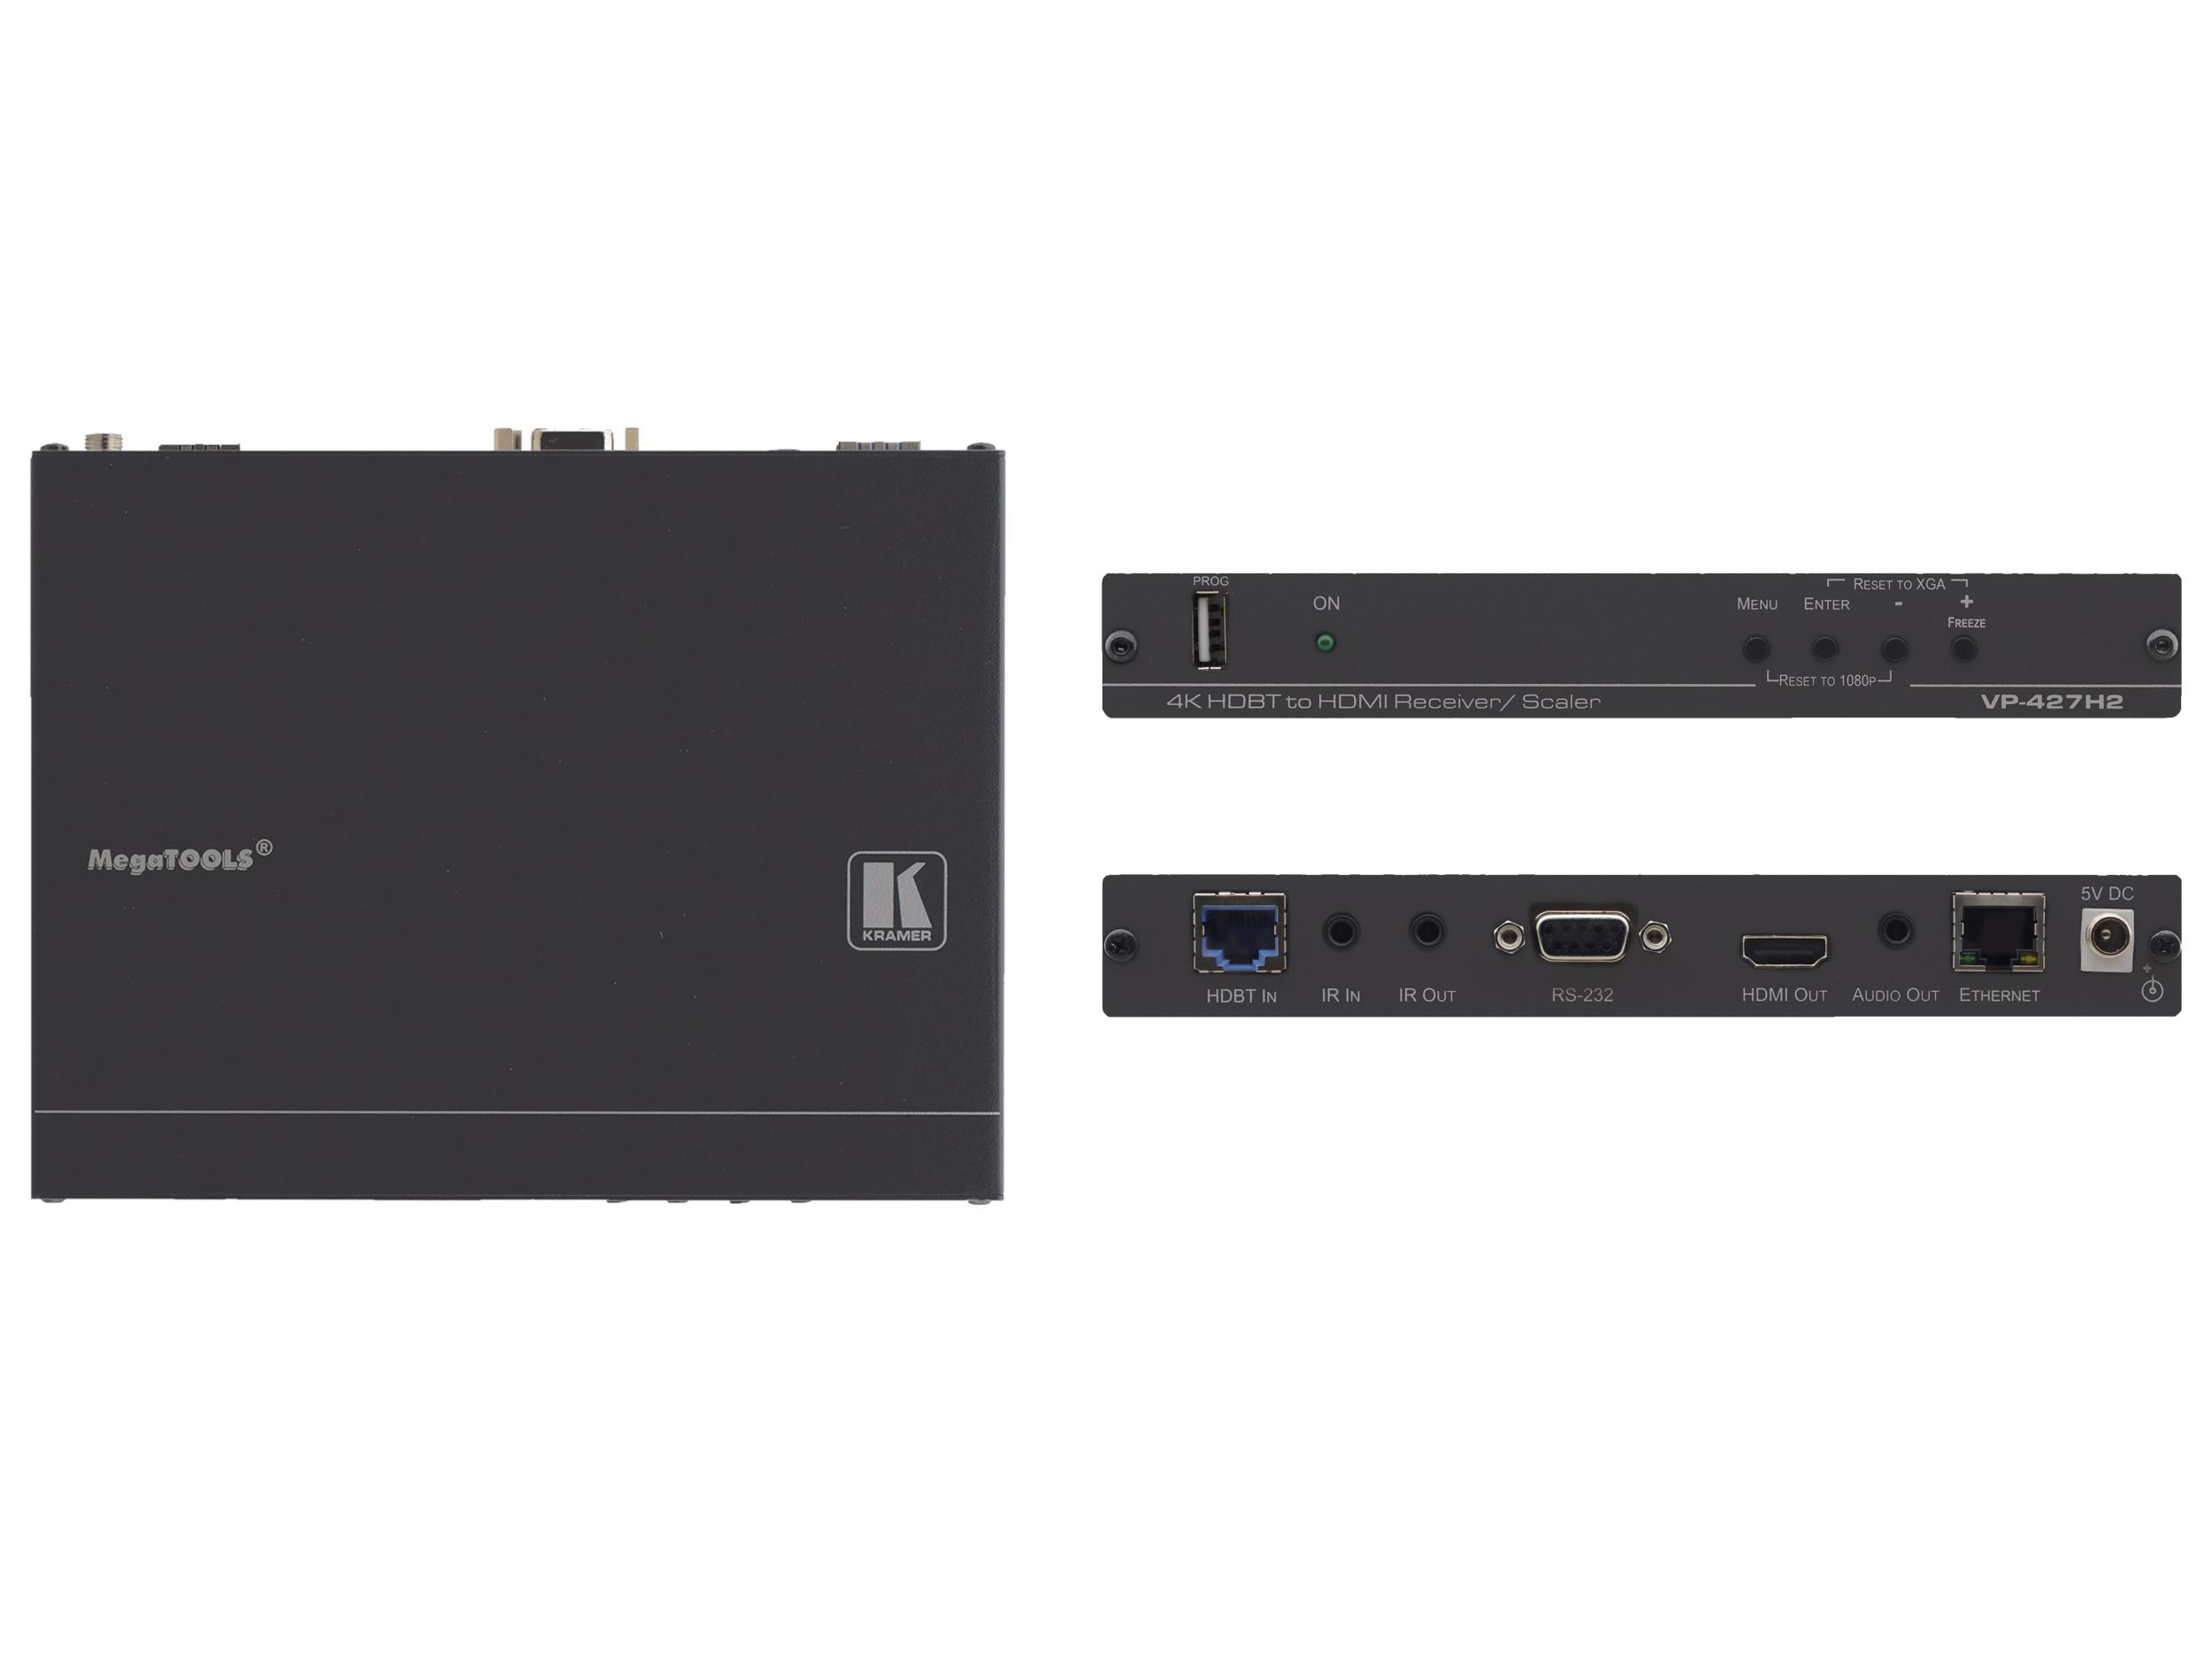 Kramer VP-427H2 4K60 4x4x4 HDMI HDCP 2.2 Receiver/Scaler with Ethernet/RS-232/IR/Stereo Audio